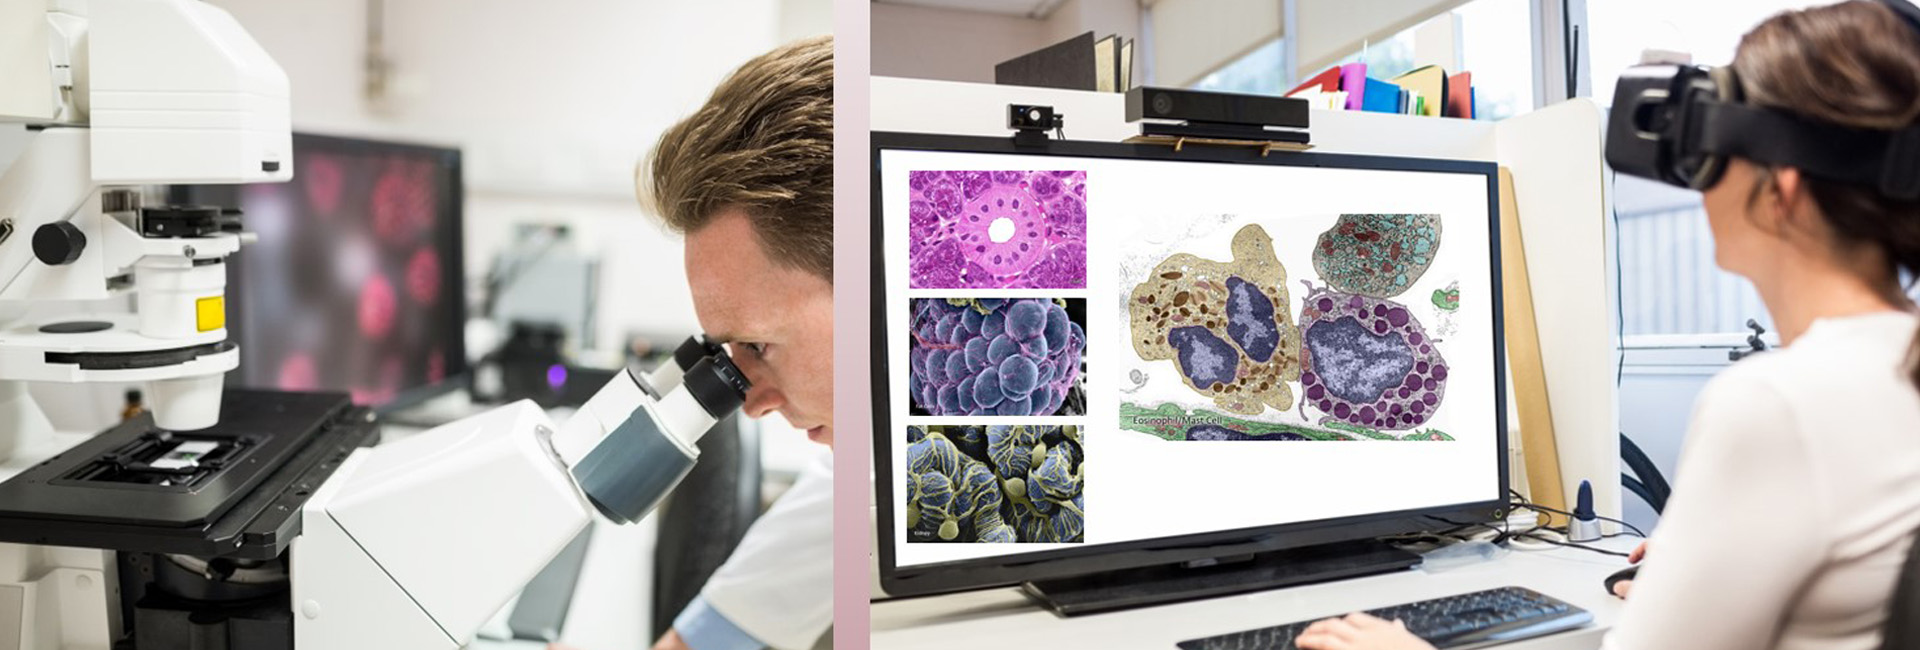 split image with a blond man looking into a microscope on the left and someone at a computer on the right